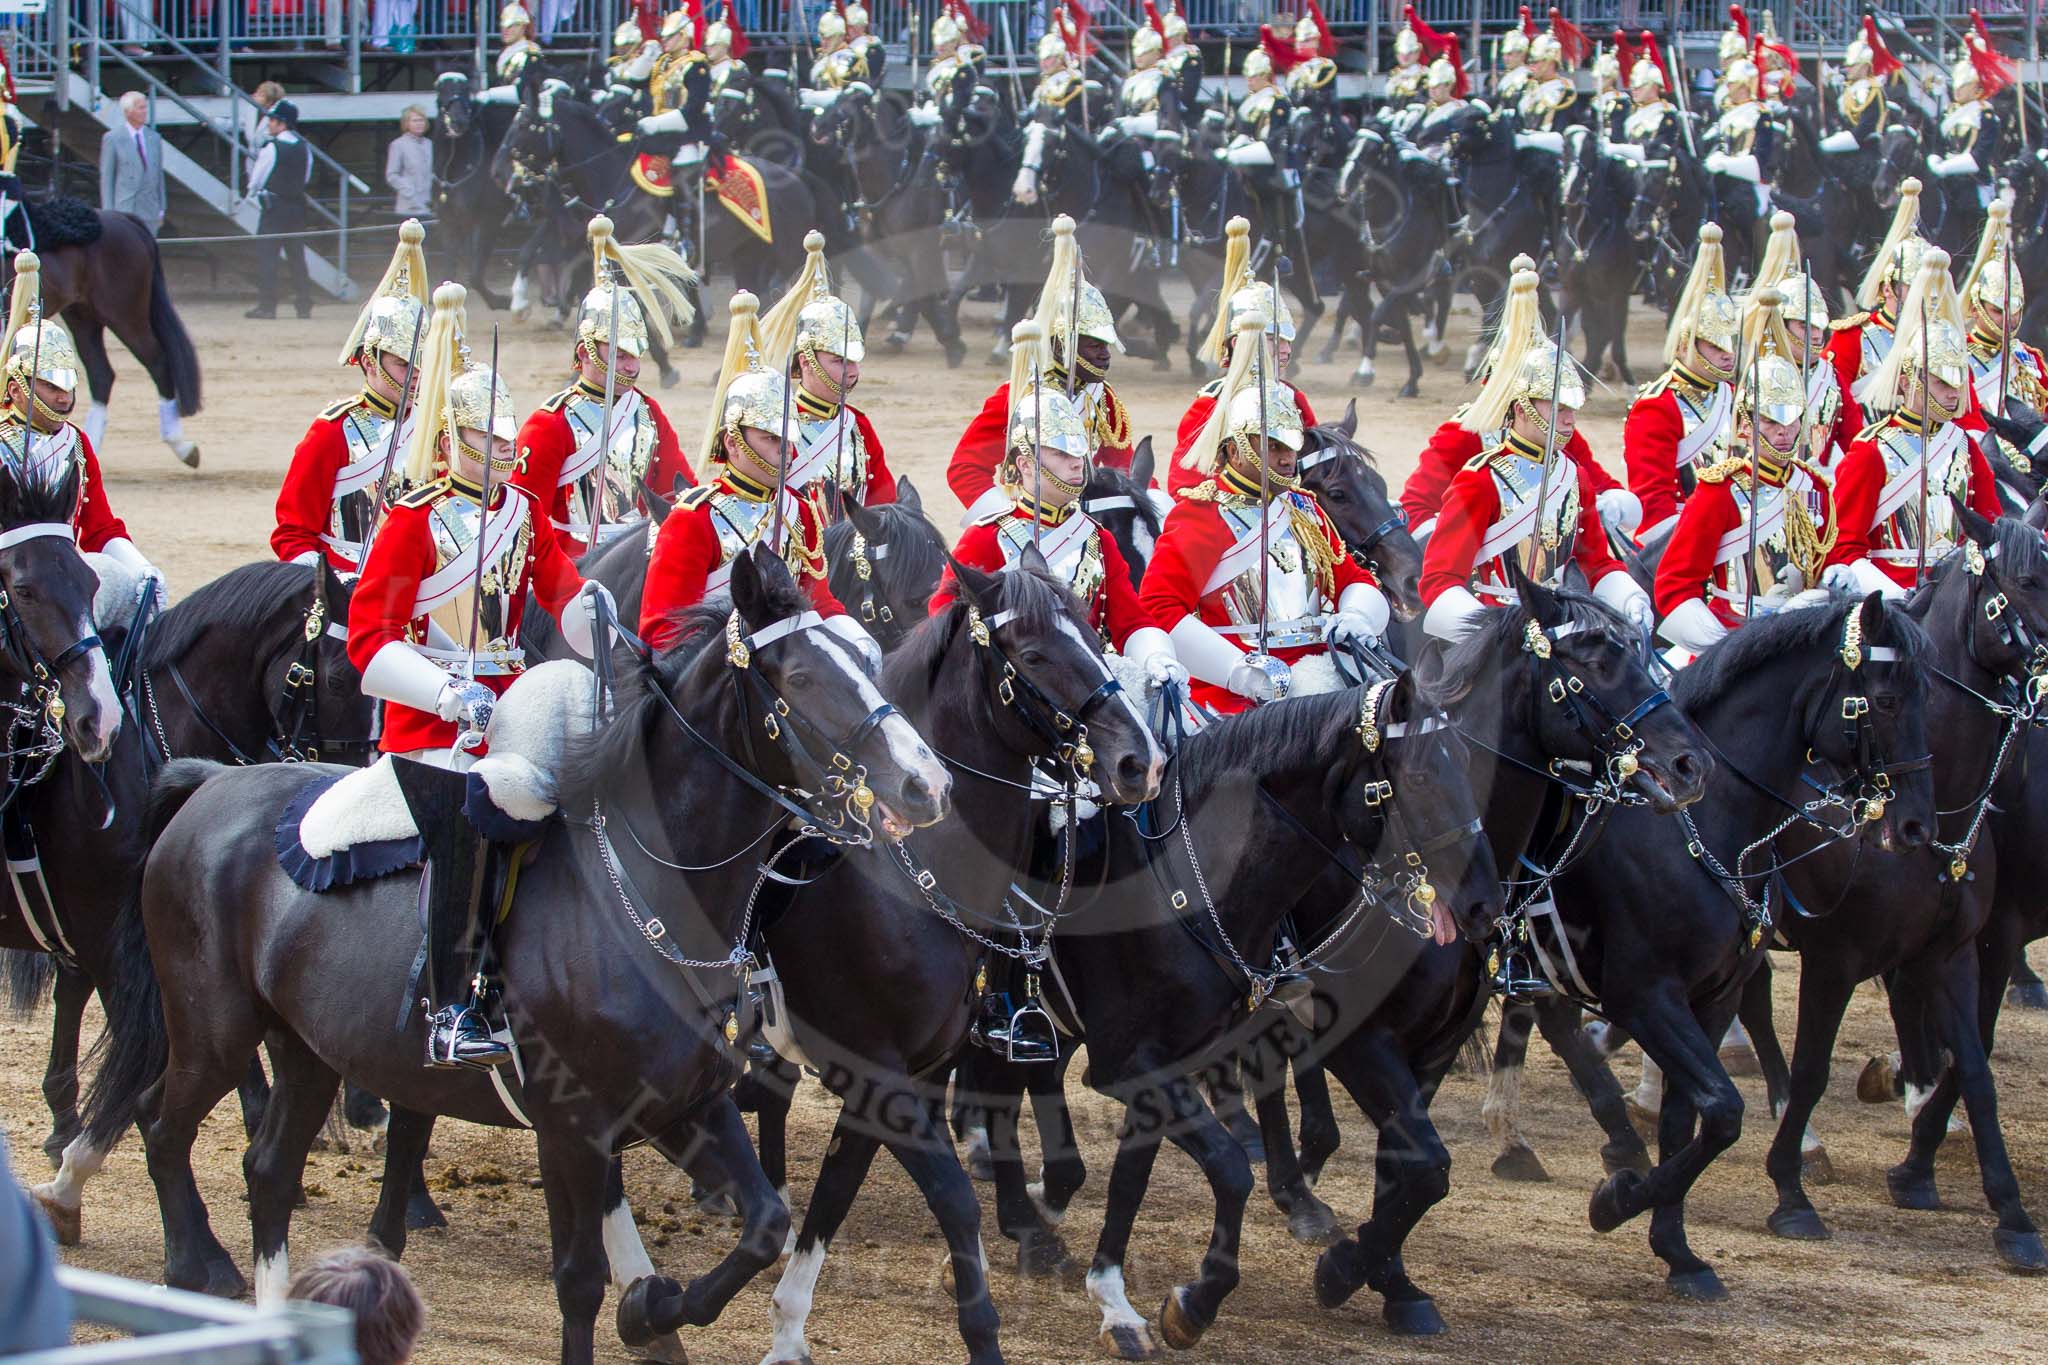 The Colonel's Review 2013: The First and Second Divisions of the Sovereign's Escort, The Life Guards, during the Ride Past..
Horse Guards Parade, Westminster,
London SW1,

United Kingdom,
on 08 June 2013 at 11:57, image #775